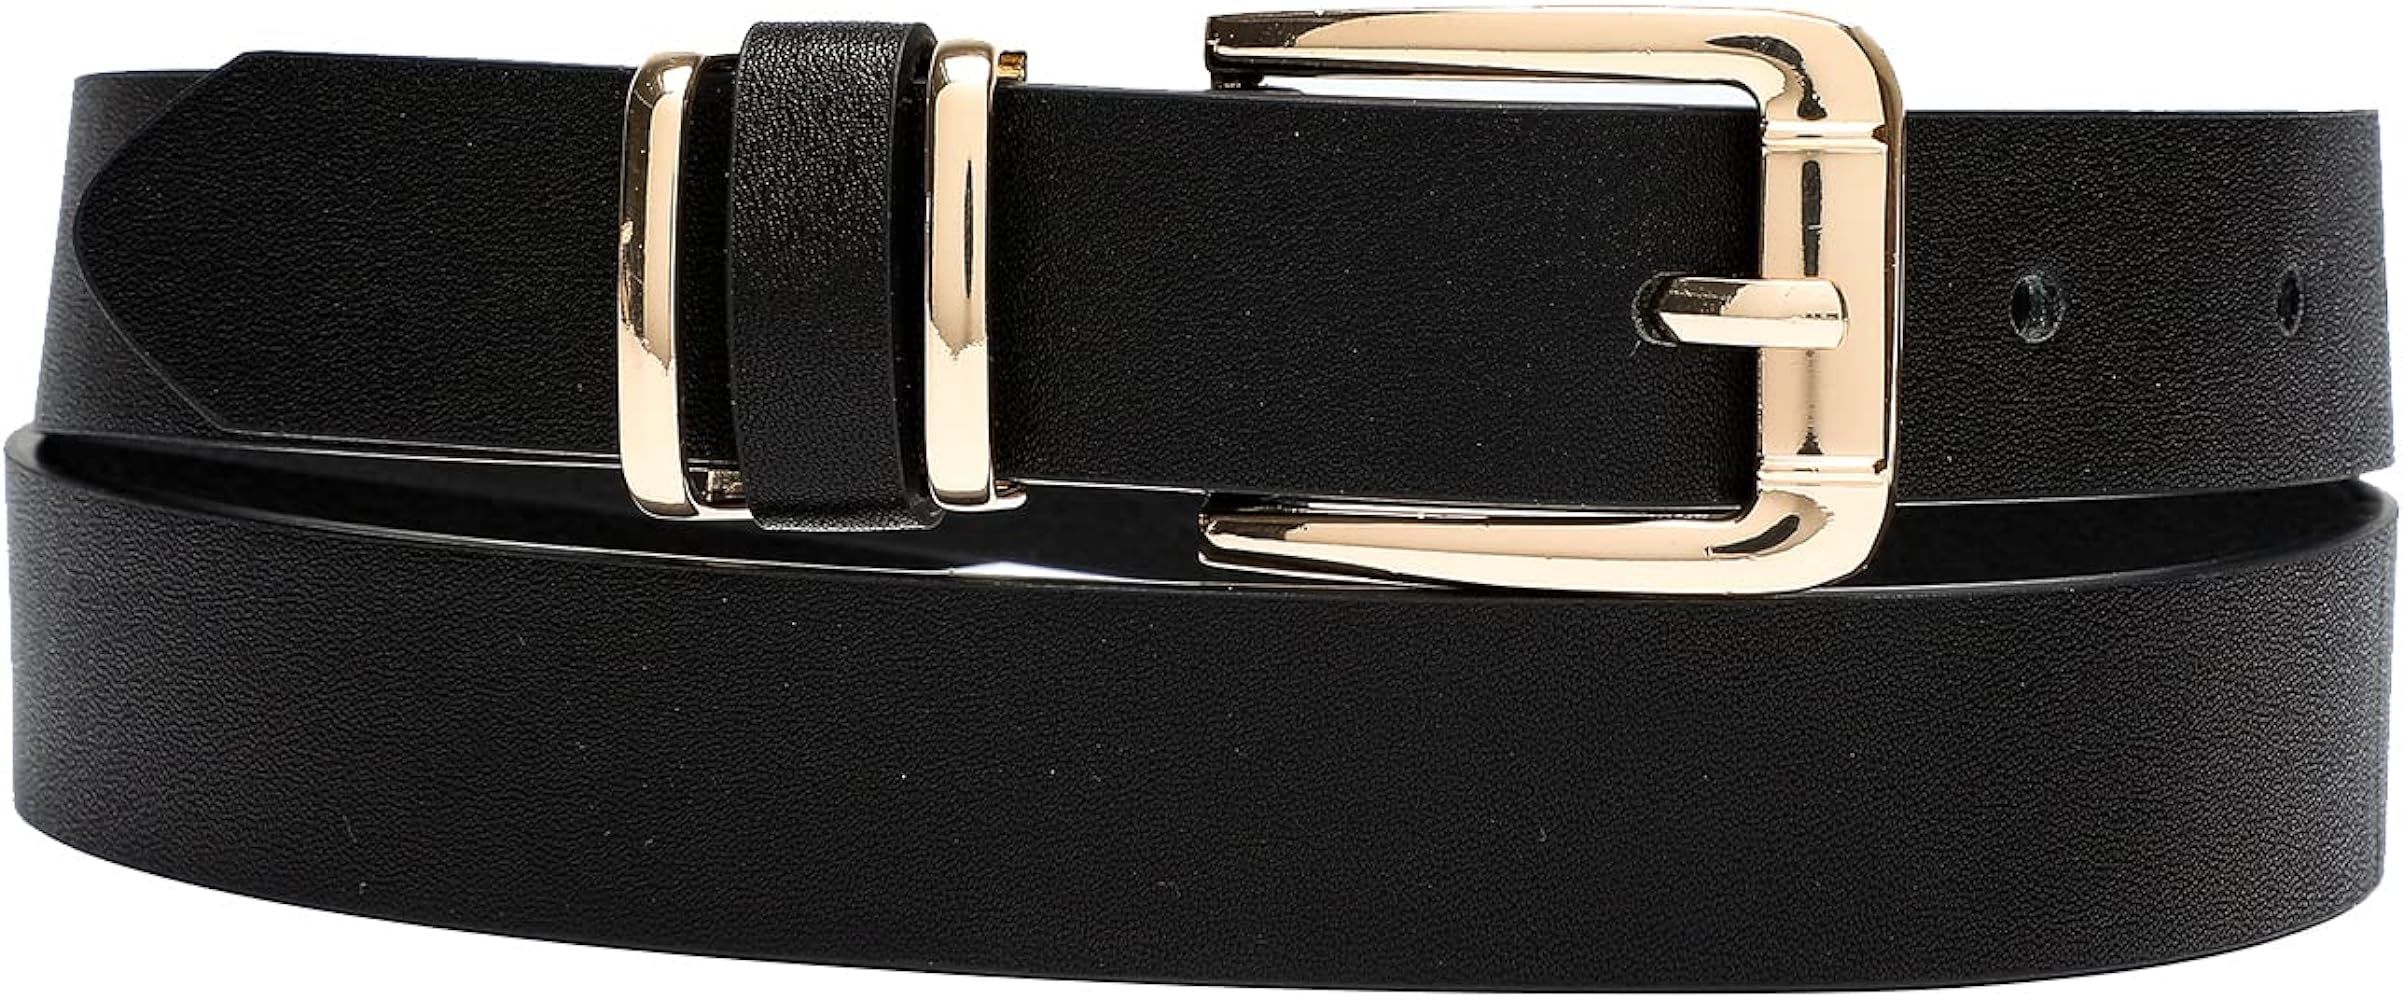 Women Waist Belts for Dresses Thin Black Skinny Leather Belts with Gold Pin Buckle | Amazon (US)